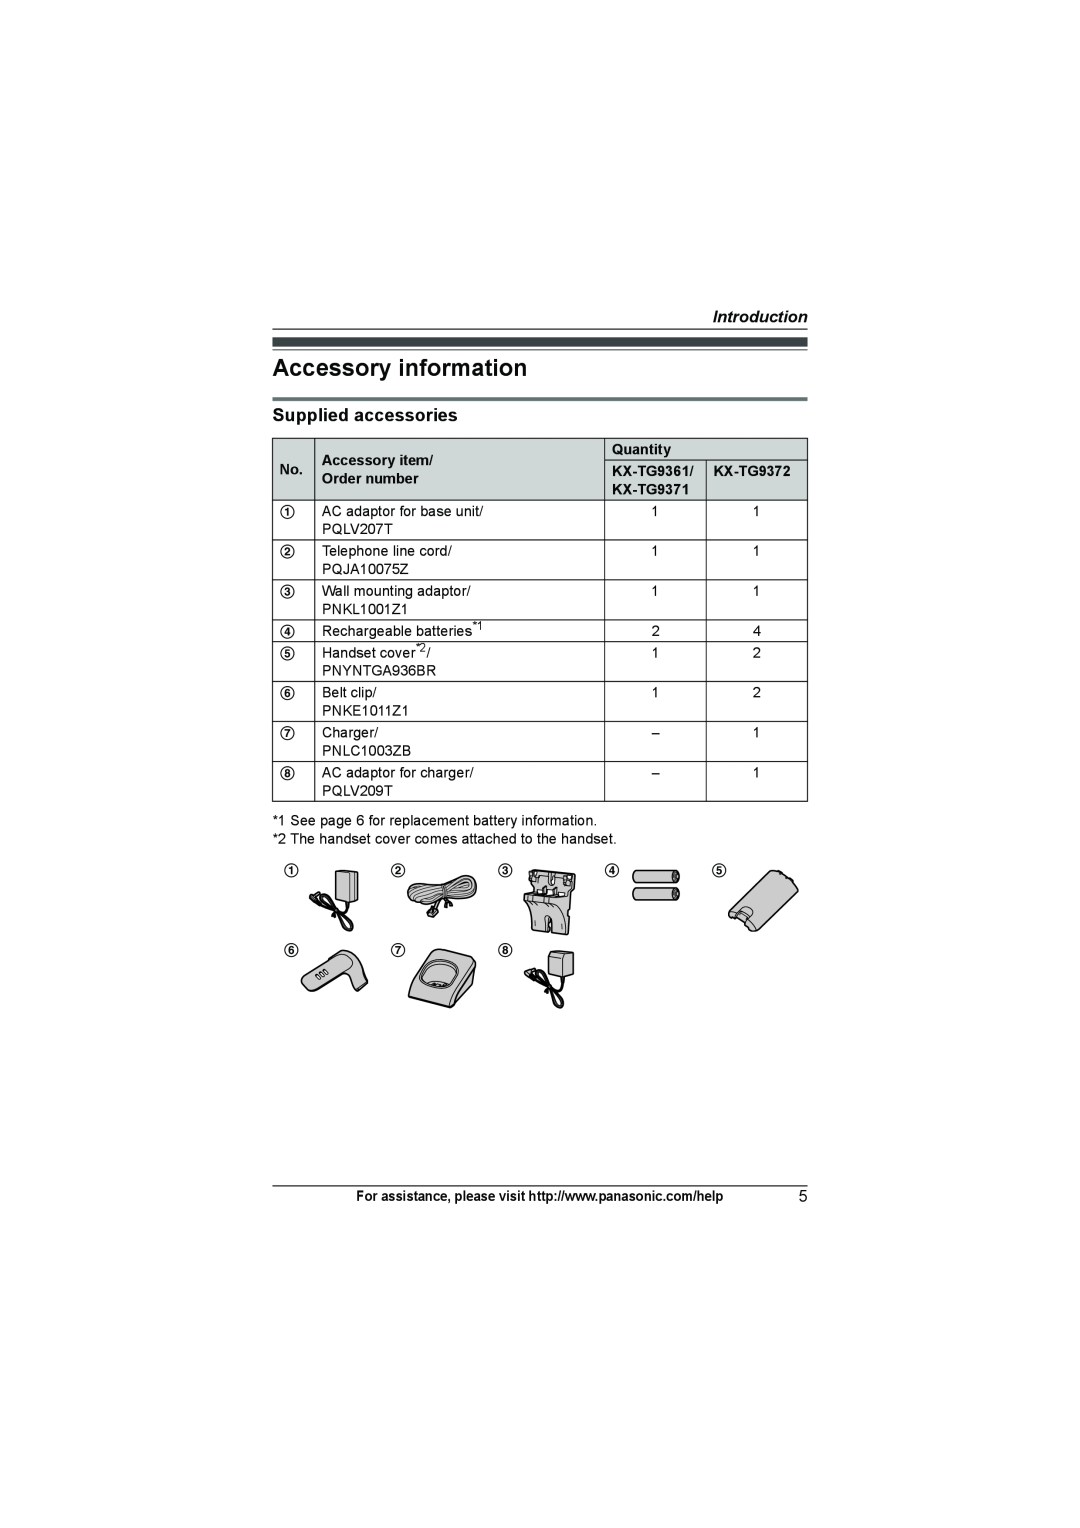 Panasonic KX-TG9371 Accessory information, Supplied accessories, Introduction, Accessory item, Quantity, KX-TG9361 